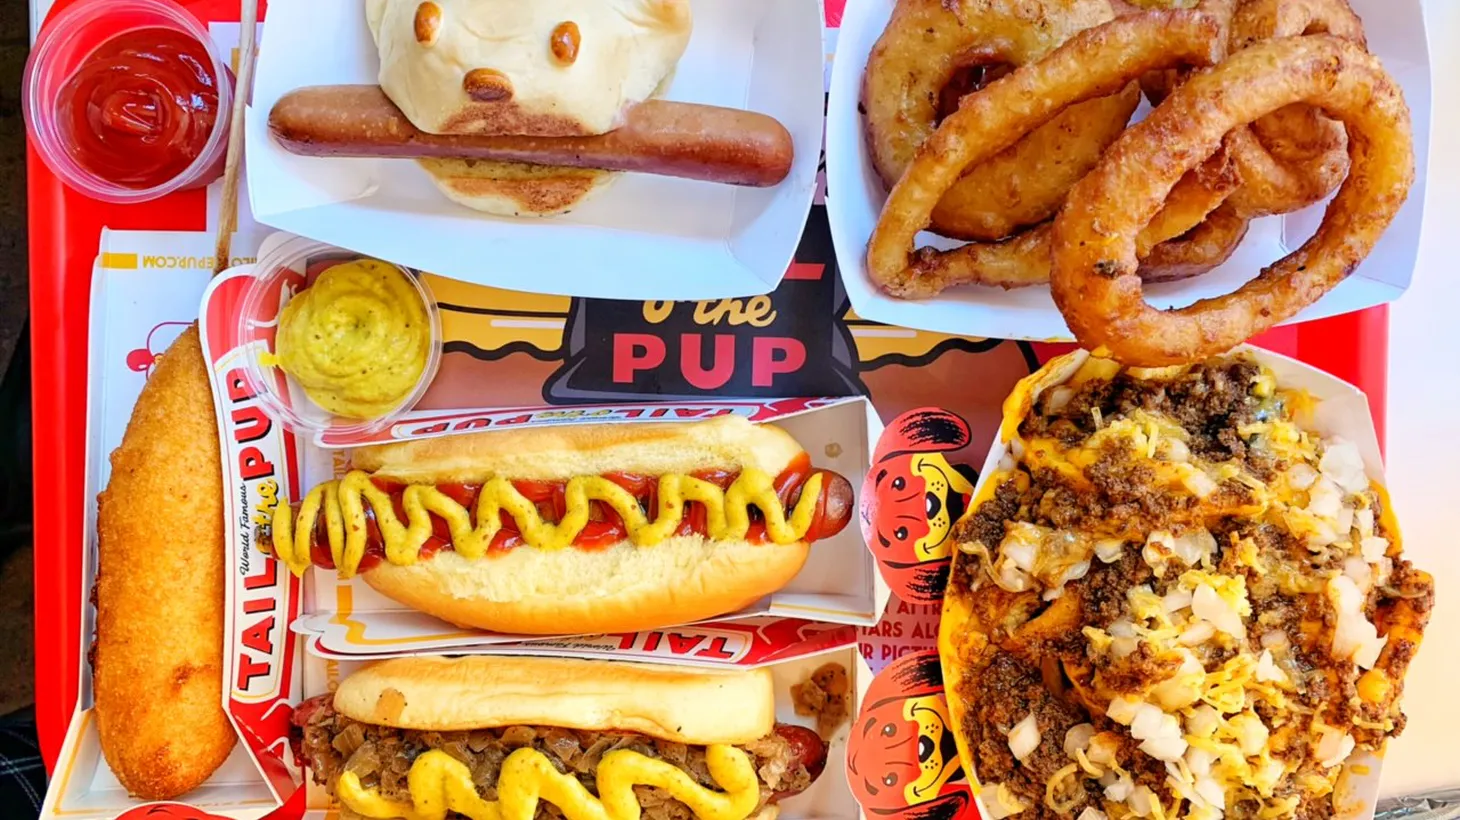 Chili fries, corn dogs, onion rings, and the 1946 Pup, an homage to the original split hot dog, are just a few items on the Tail O’ the Pup menu that “will make you smile.”